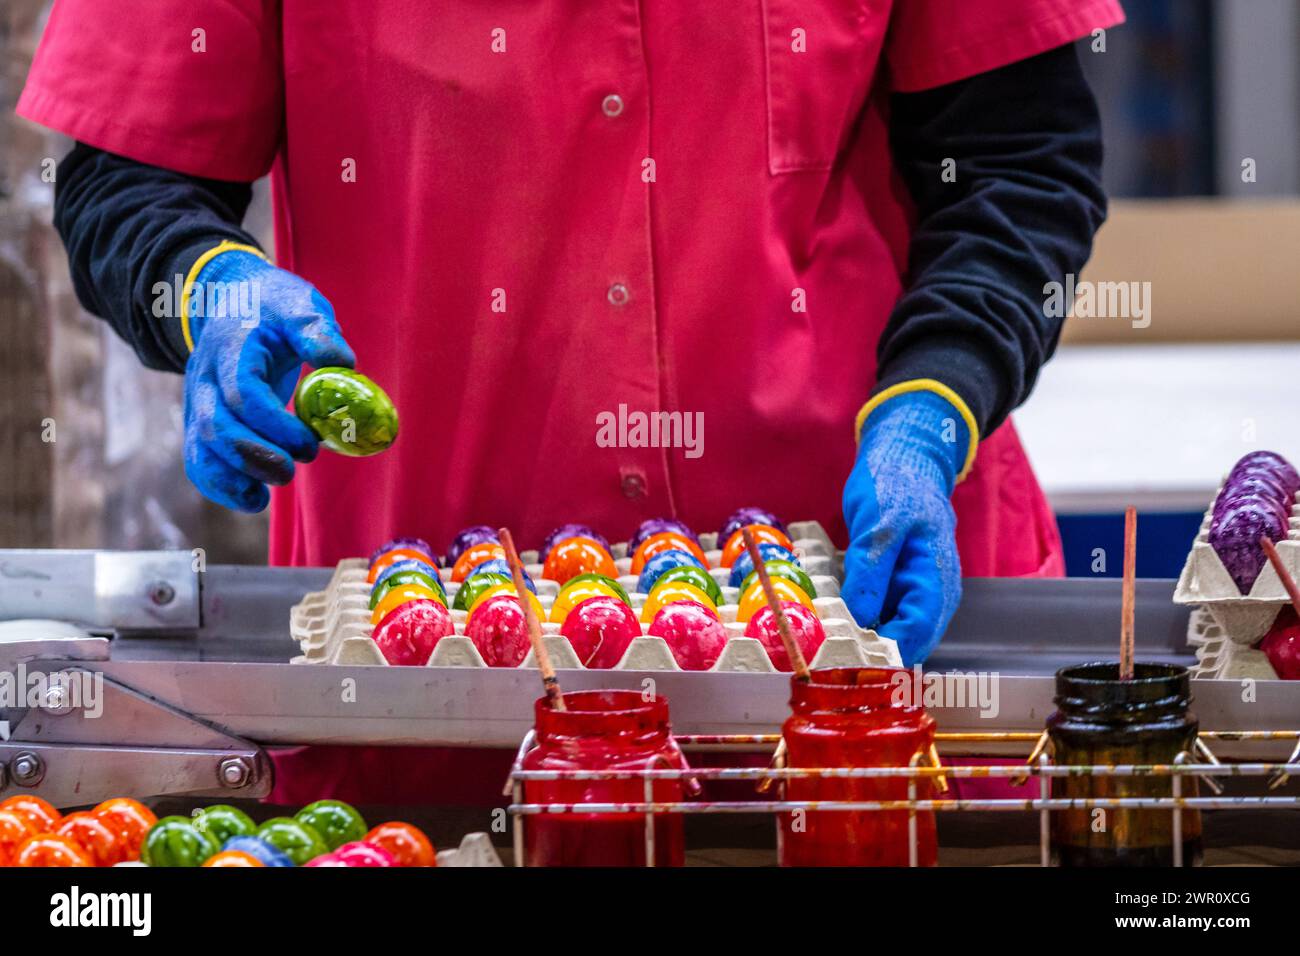 Thannhausen, Bavaria, Germany - 10 March 2024: Employee on the assembly line at the Beham egg dyeing plant in Thannhausen in Bavaria sorts Easter eggs by color *** Mitarbeiterin am Fließband bei der Eierfärberei Beham in Thannhausen in Bayern sortiert Ostereier nach Farben Stock Photo